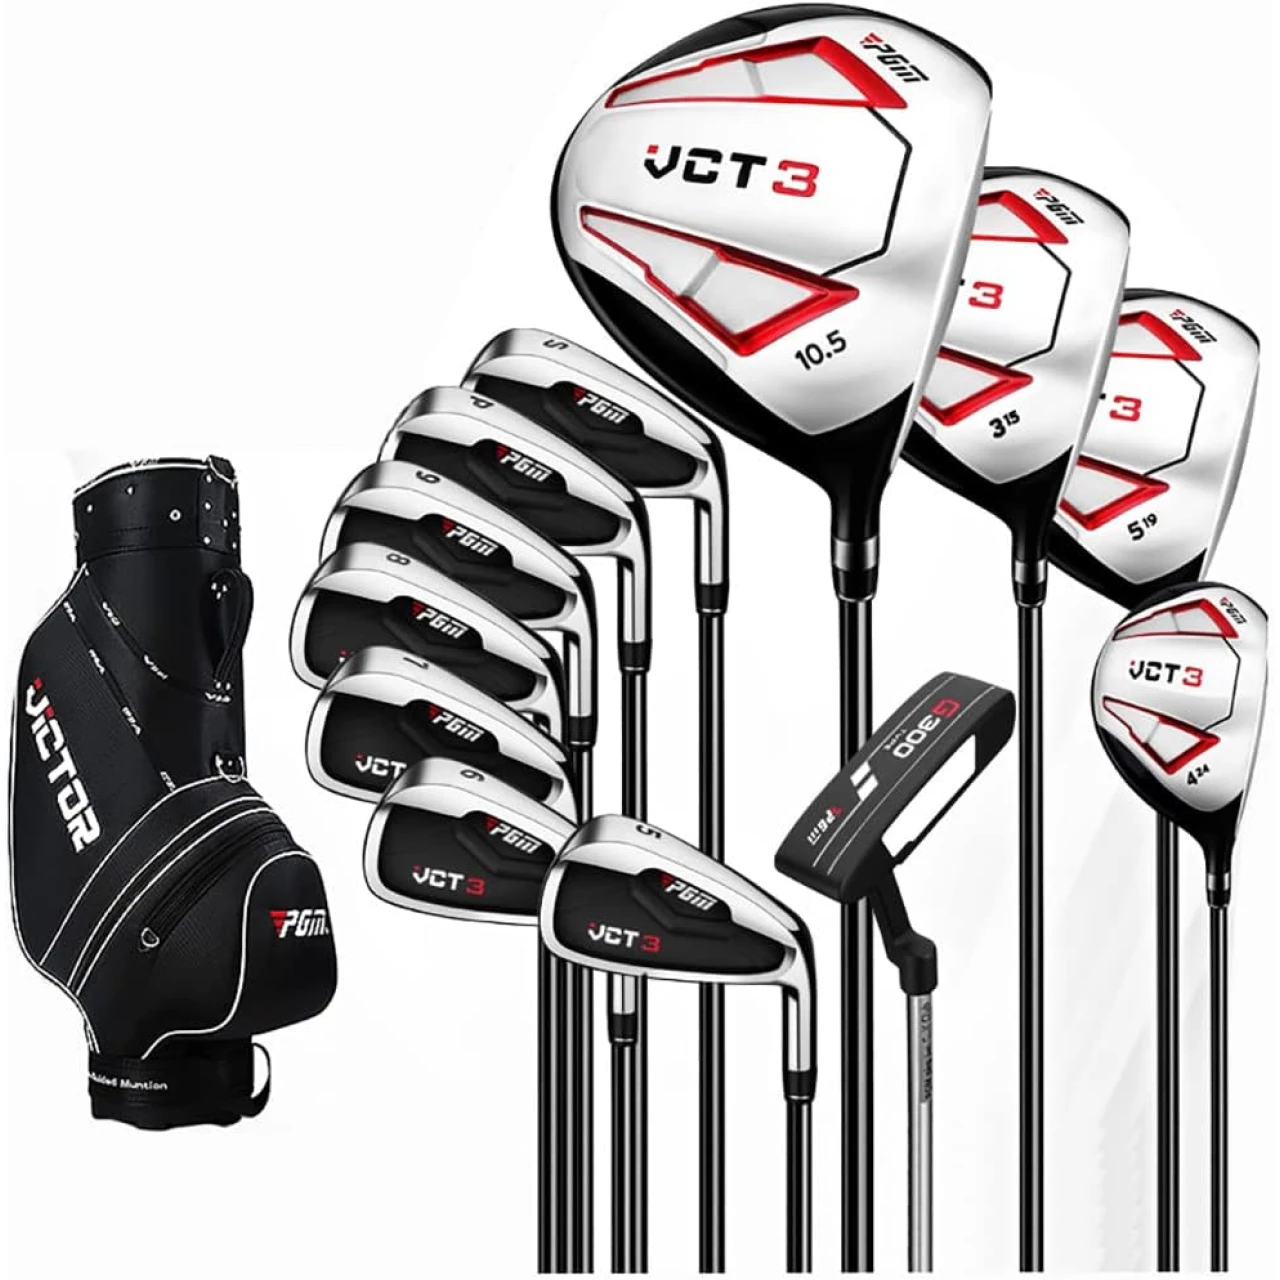 Golf Clubs Complete Set for Men 13 Piece Includes Titanium Golf Driver, 3 &amp; #5 Fairway Woods, 4 Hybrid, 5-SW Irons, Putter and Golf Bag